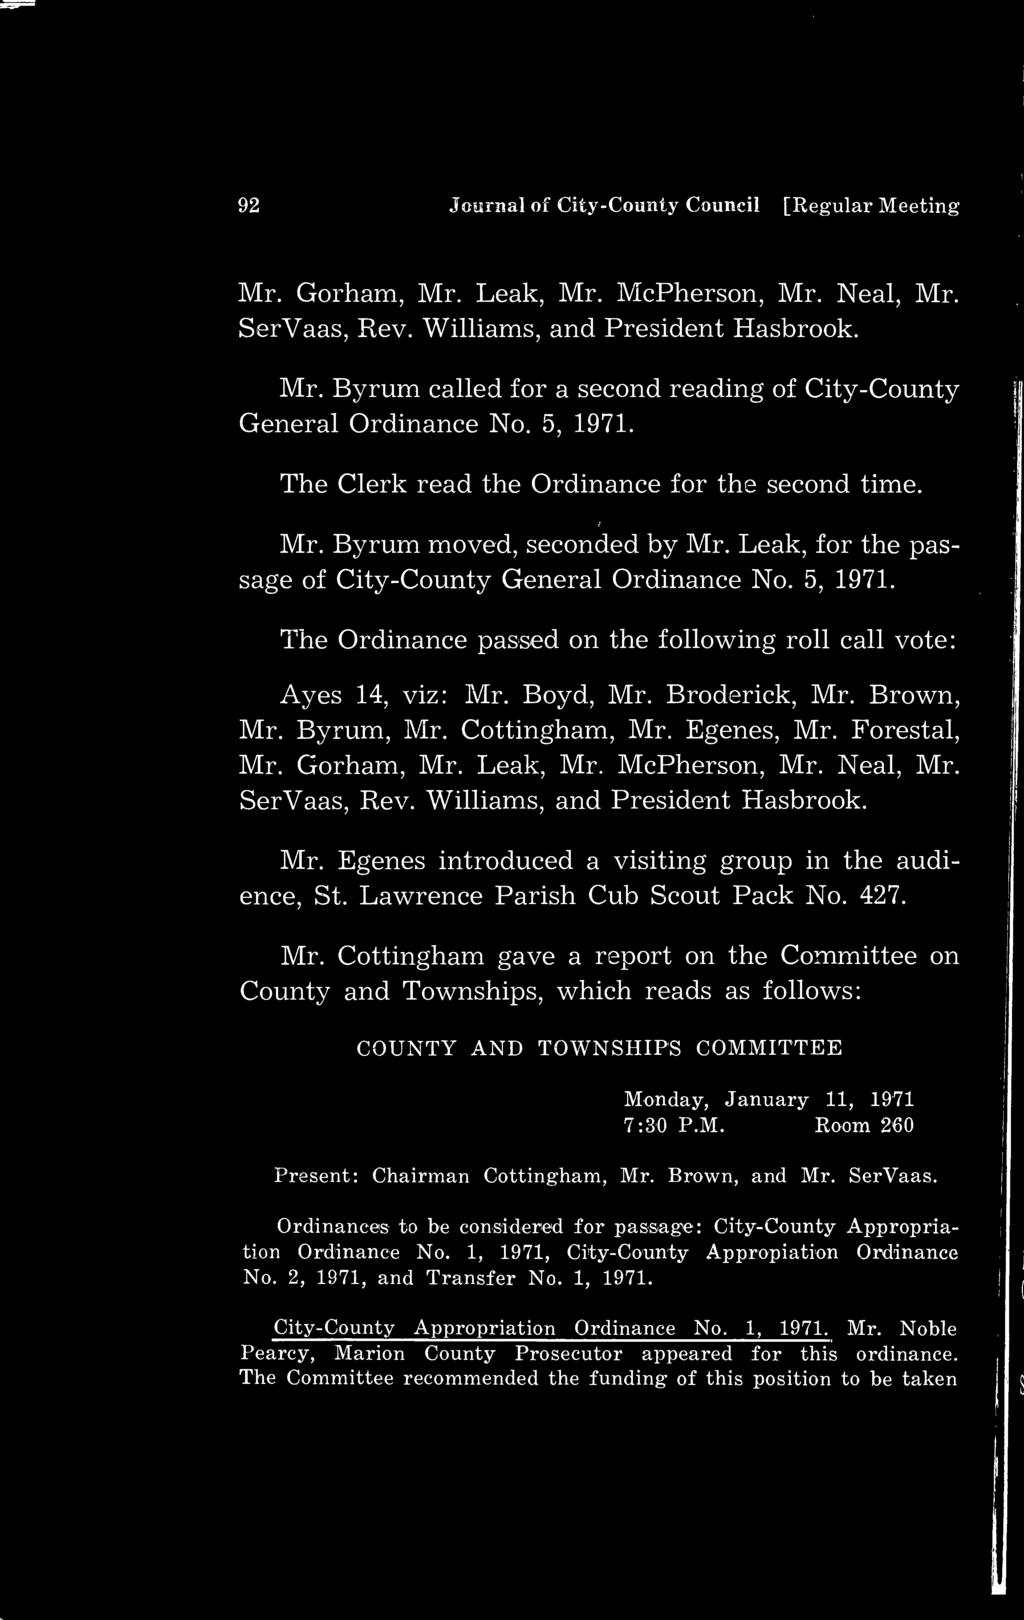 92 Journal of City-County Council [Regular Meeting Mr. Gorham, Mr. Leak, Mr. McPherson, Mr. Neal, Mr. SerVaas, Rev. Williams, and President Hasbrook. Mr. Byrum called for a second reading of City-County General Ordinance No.